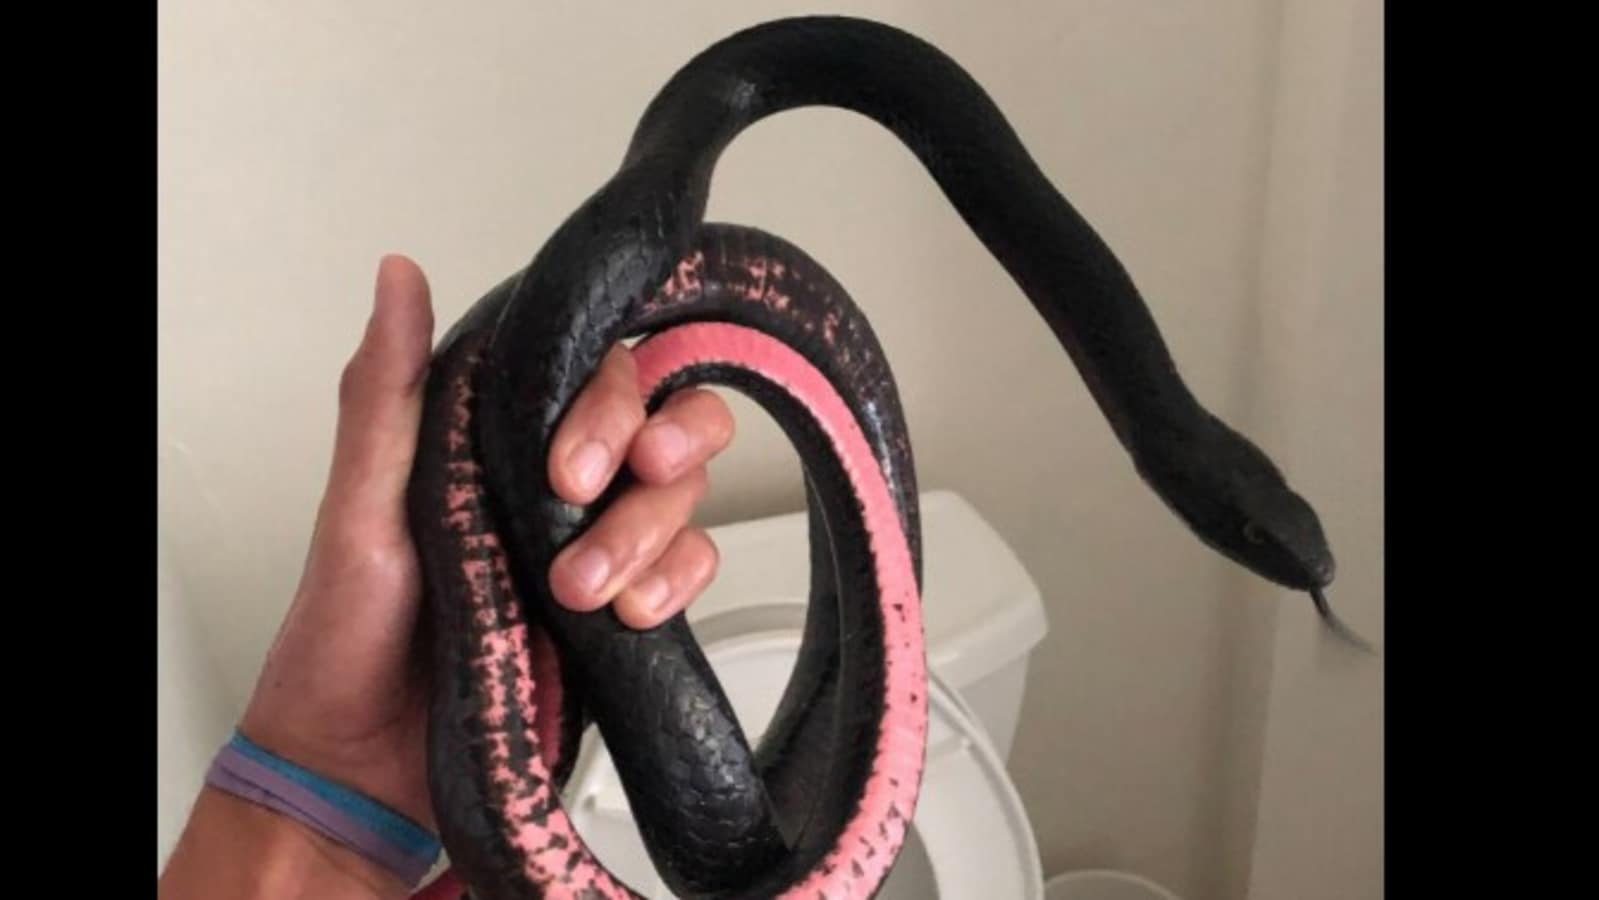 Snake hides inside woman's toilet, people call it a 'nightmare'